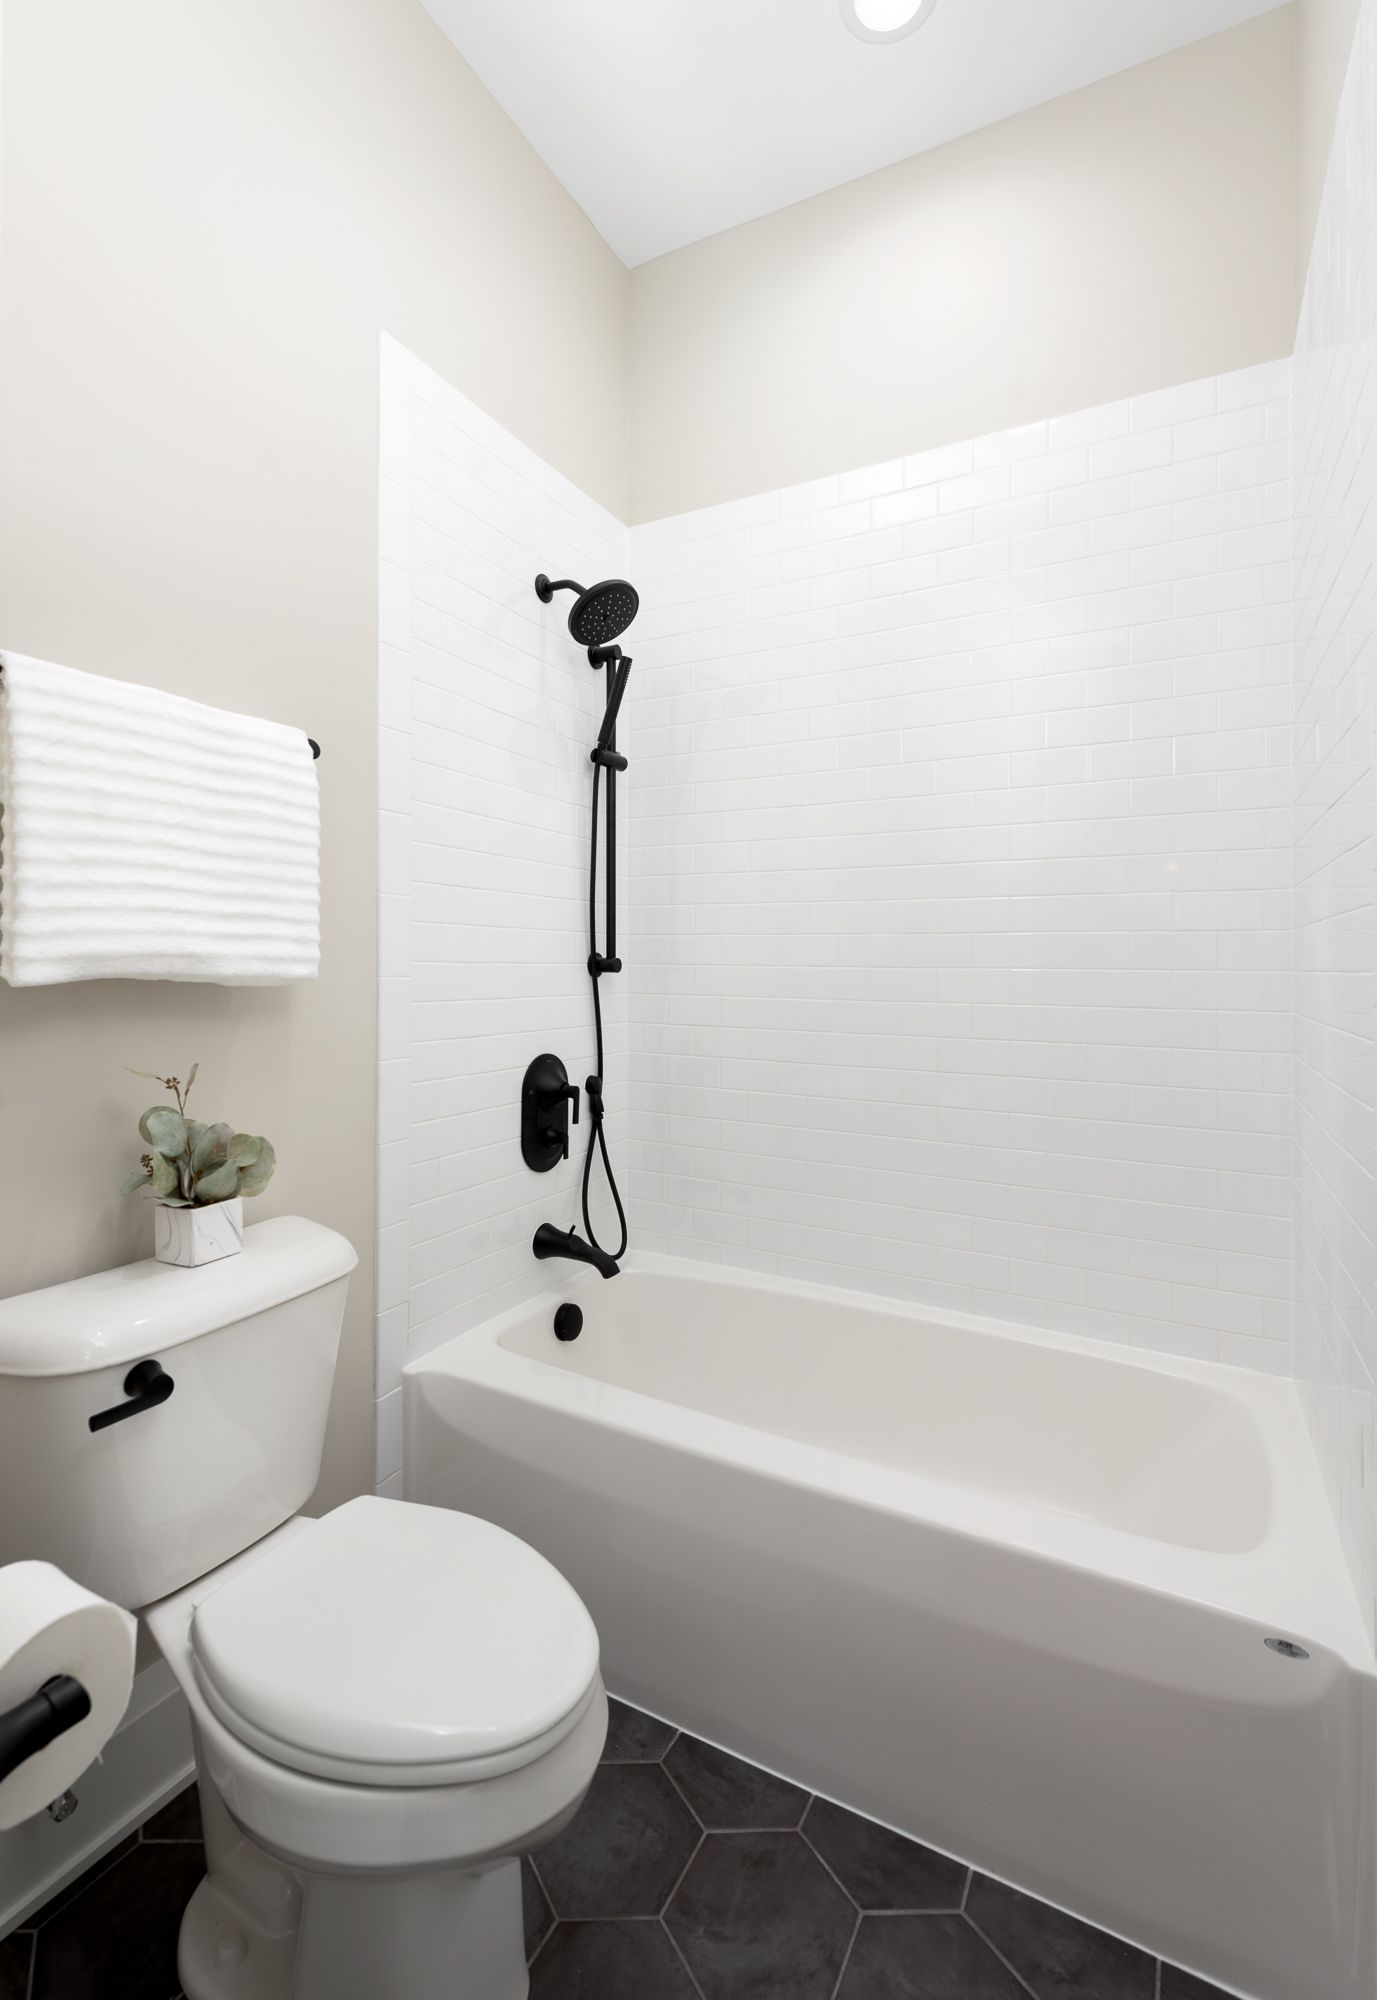 Bathroom with white tile and black plumbing fixtures